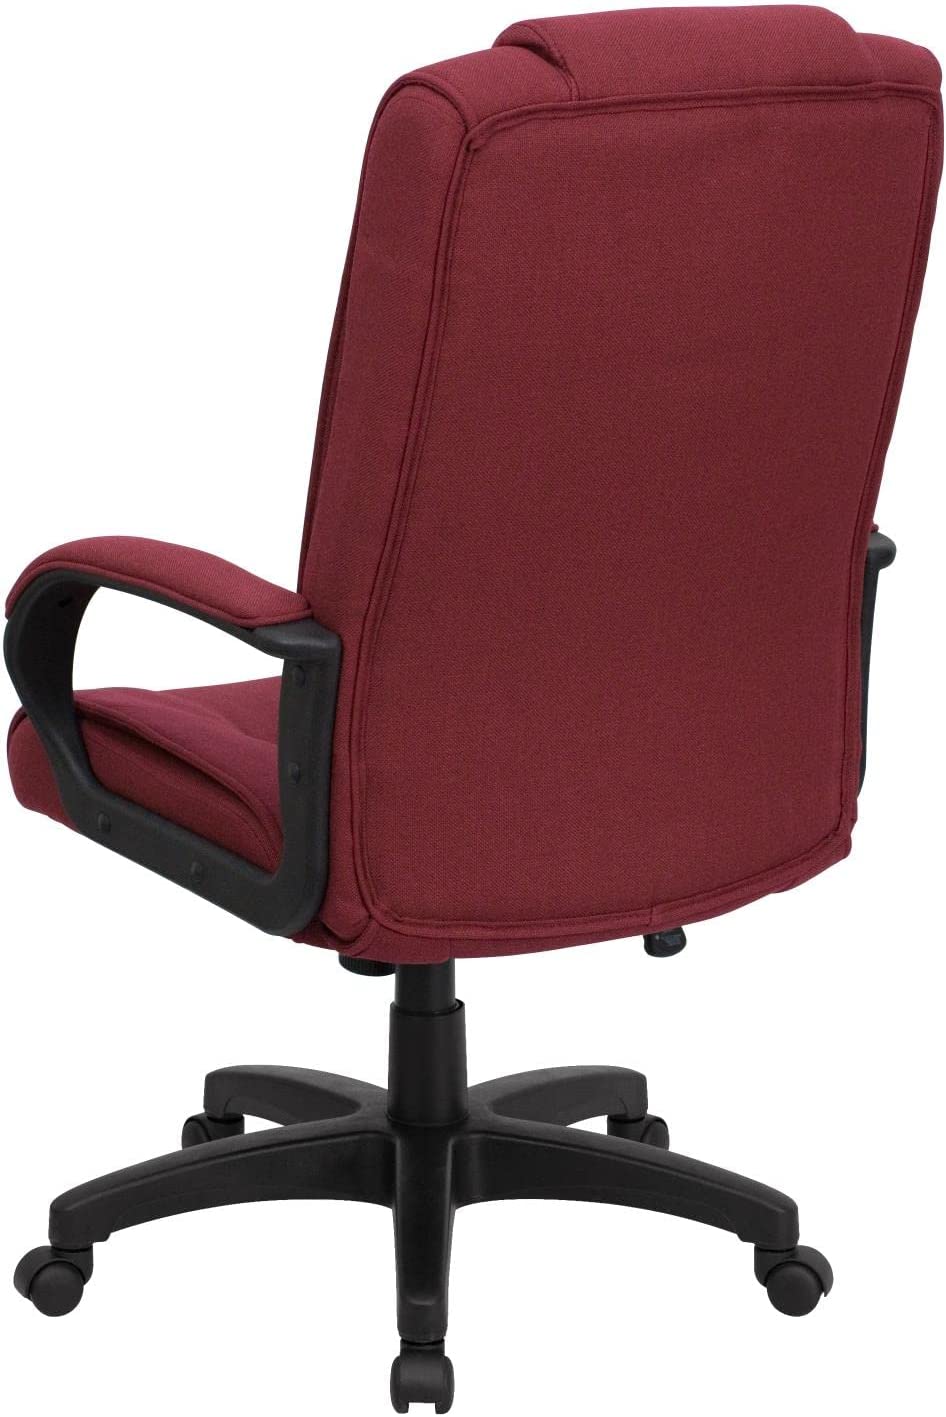 Flash Furniture High Back Burgundy Fabric Executive Swivel Office Chair with Arms